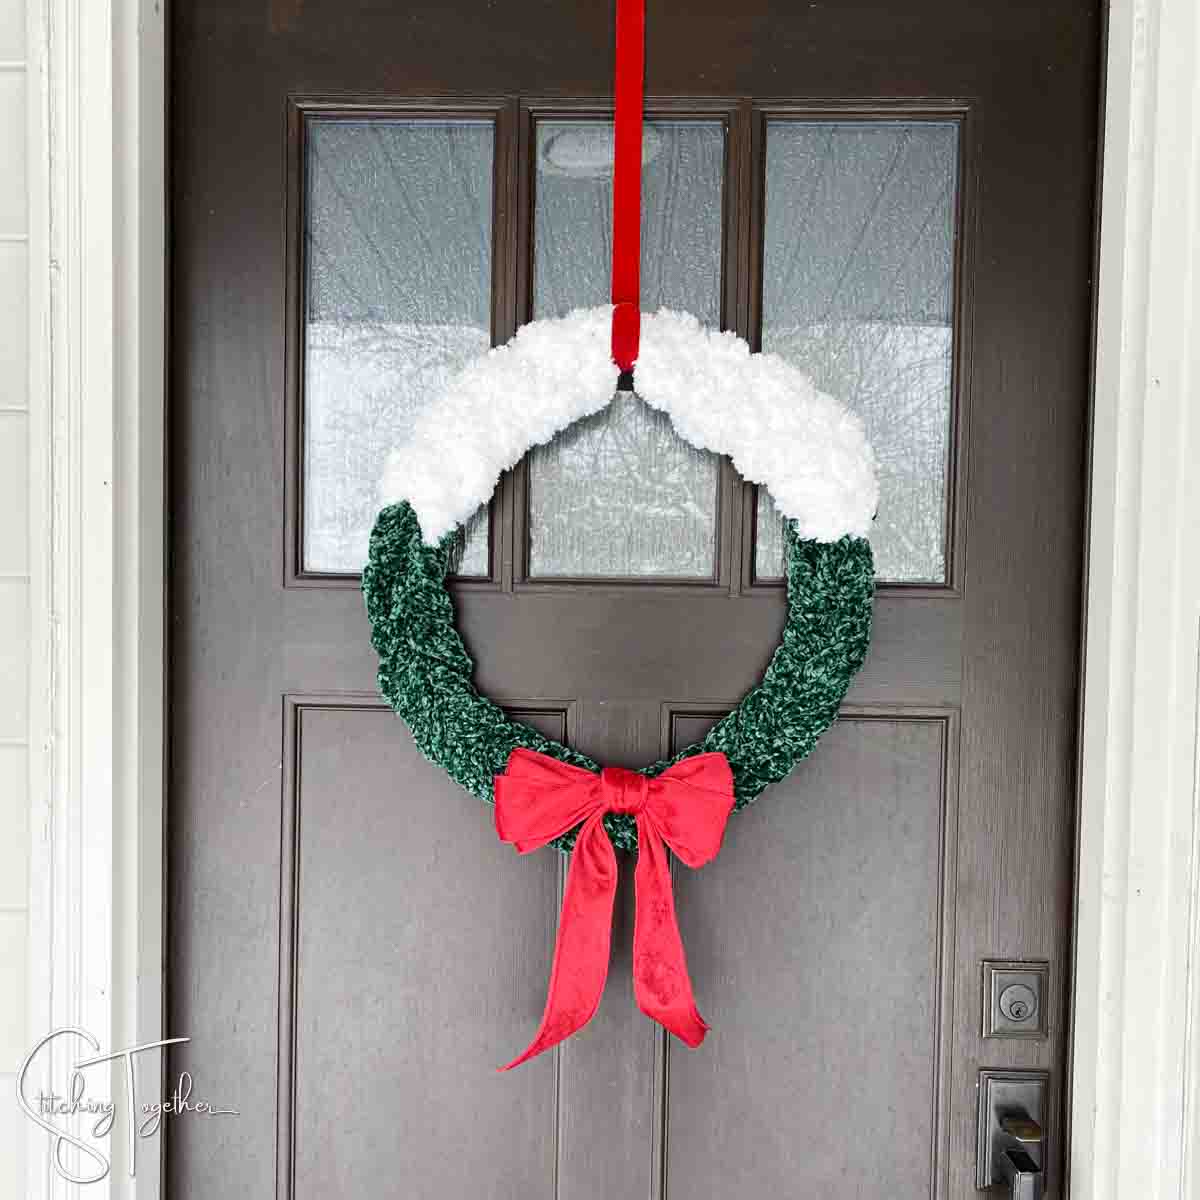 green and white Christmas crochet wreath with a large red bow hanging on a front door by a red wreath hanger